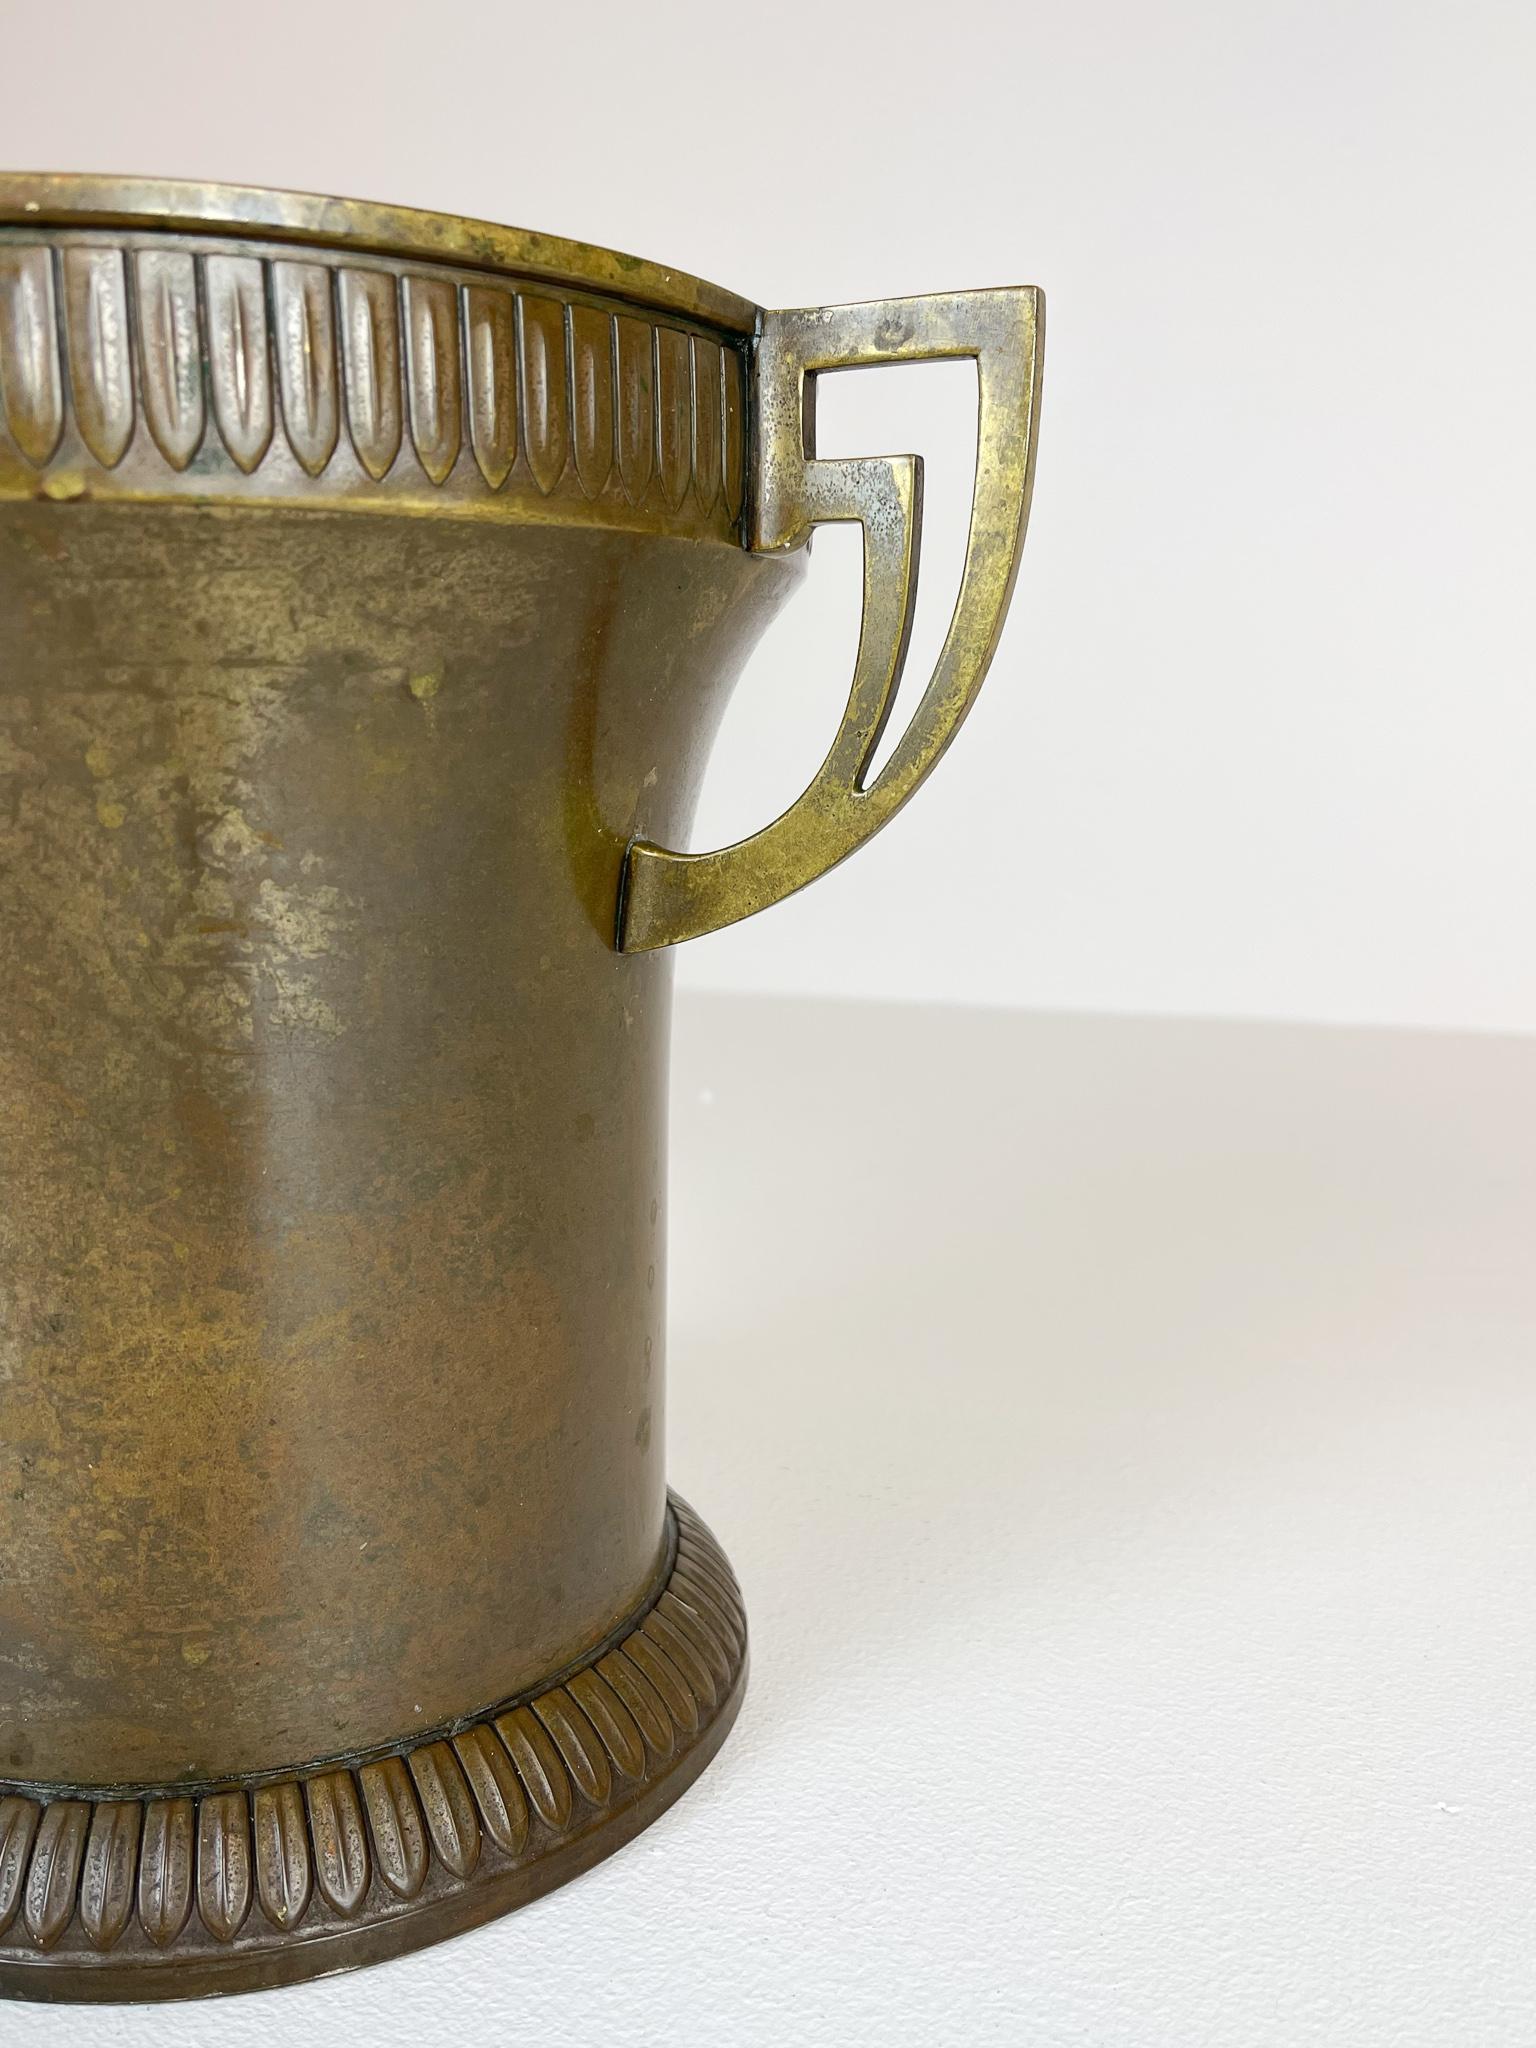 Art Deco Champagne Cooler Copper and Brass Relief Pattern Sweden, 1930s In Good Condition For Sale In Hillringsberg, SE